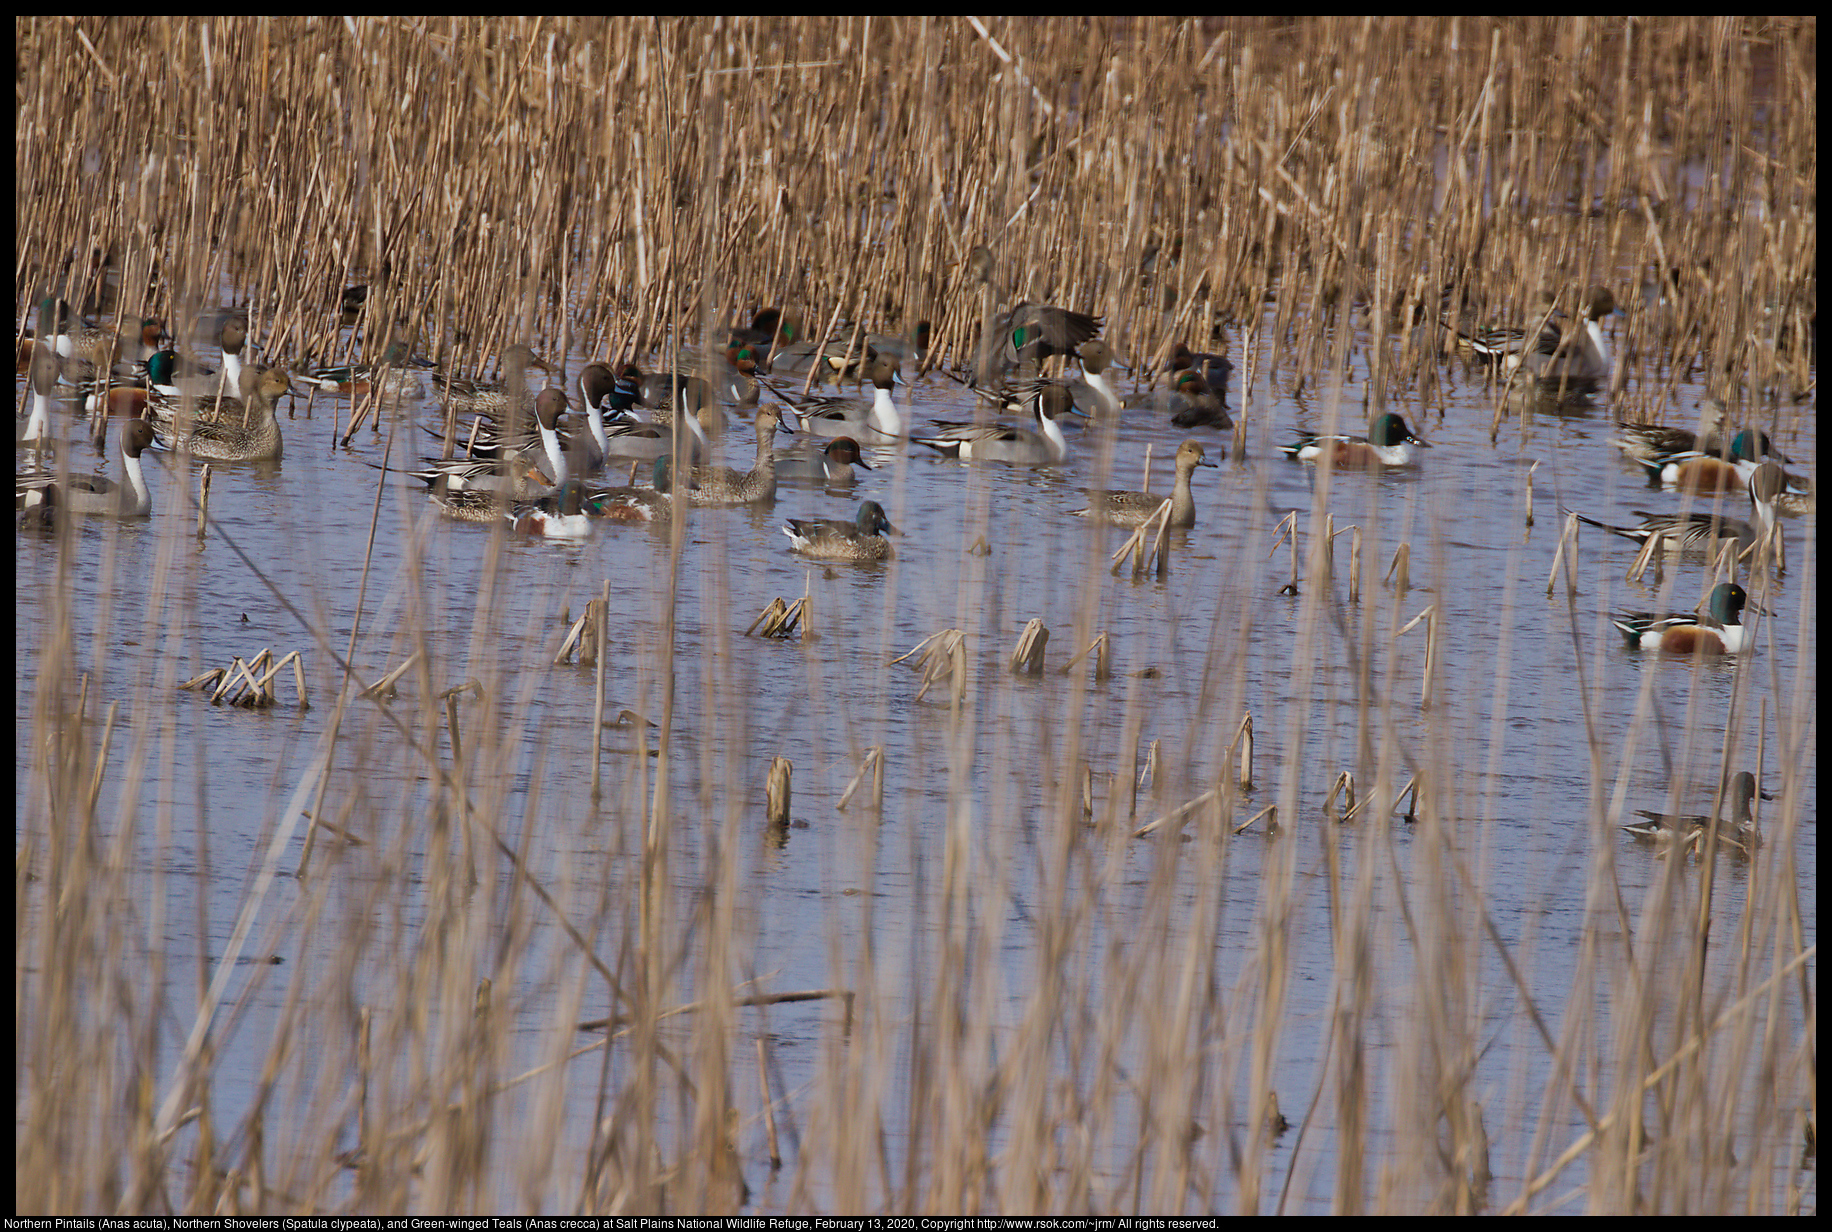 Northern Pintails (Anas acuta), Northern Shovelers (Spatula clypeata), and Green-winged Teals (Anas crecca) at Salt Plains National Wildlife Refuge, February 13, 2020